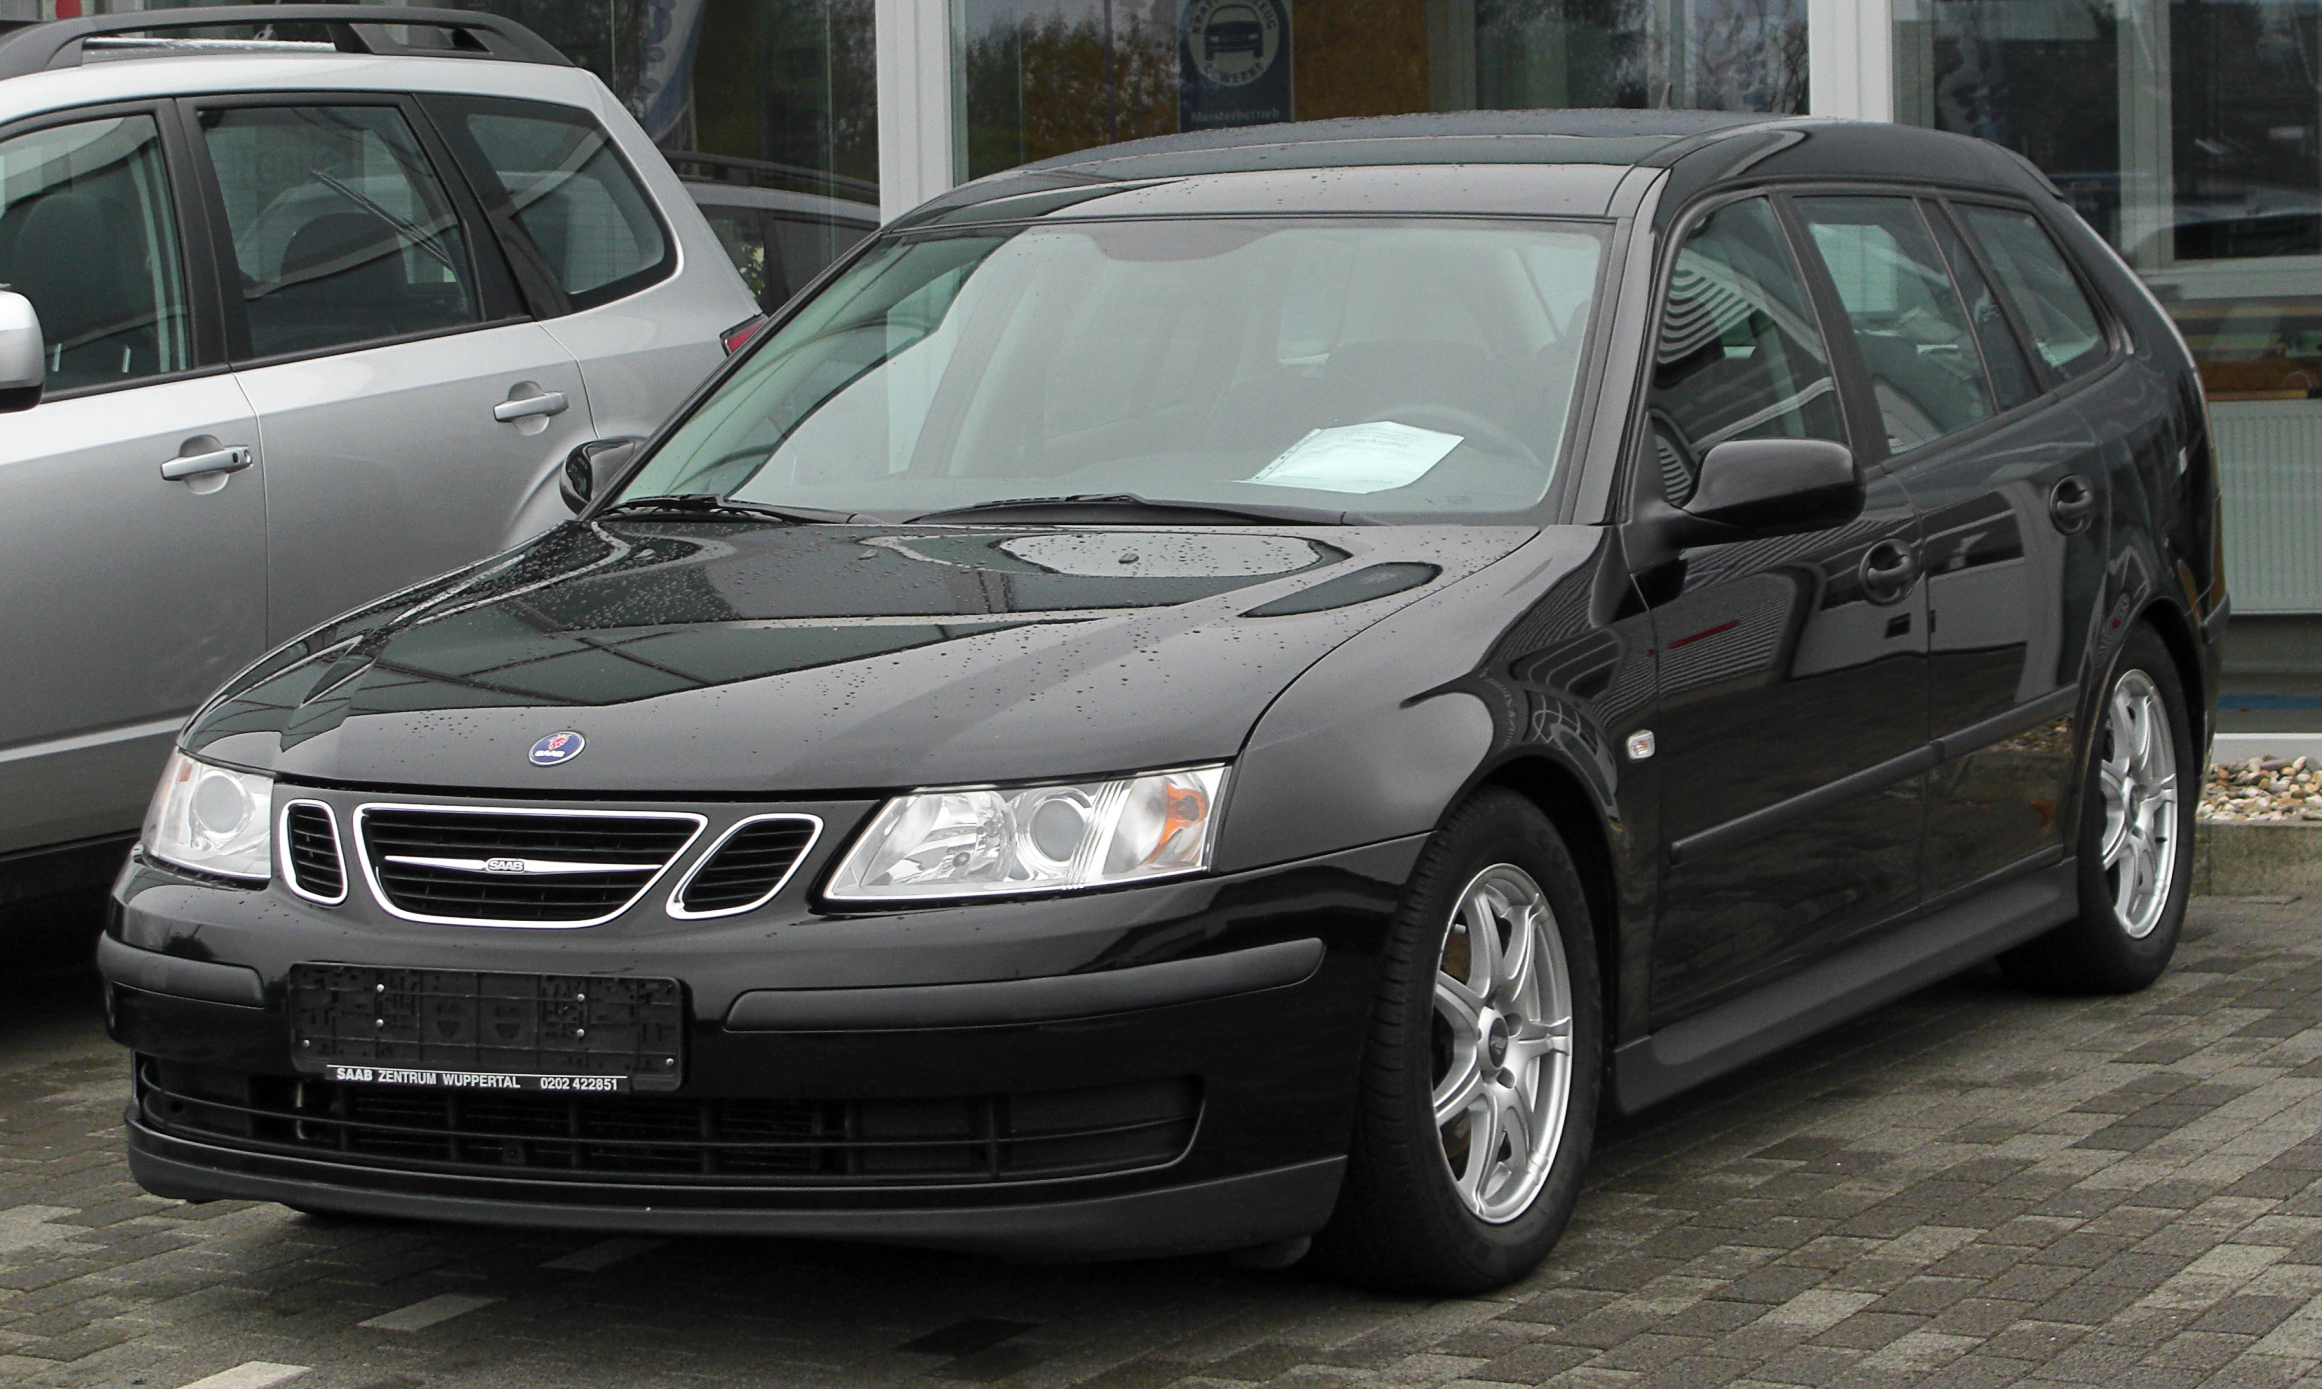 Saab 9 3 2 Tid Best Images Collection Of - kootation.